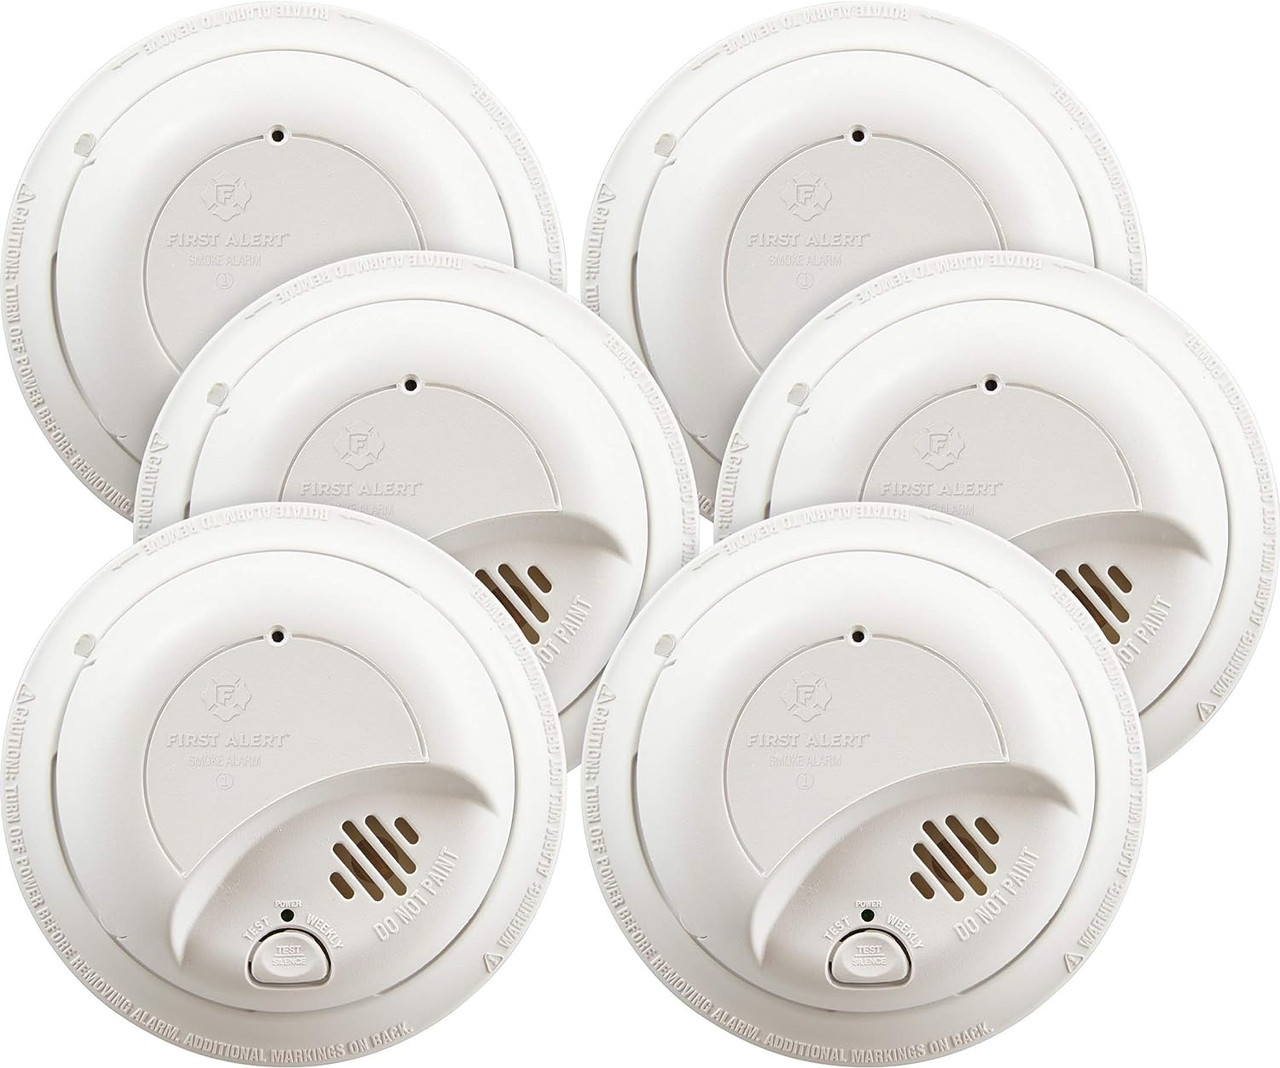 First Alert 9120B6CP Hard Wired Smoke Alarm with Battery Backup (6-Pack)